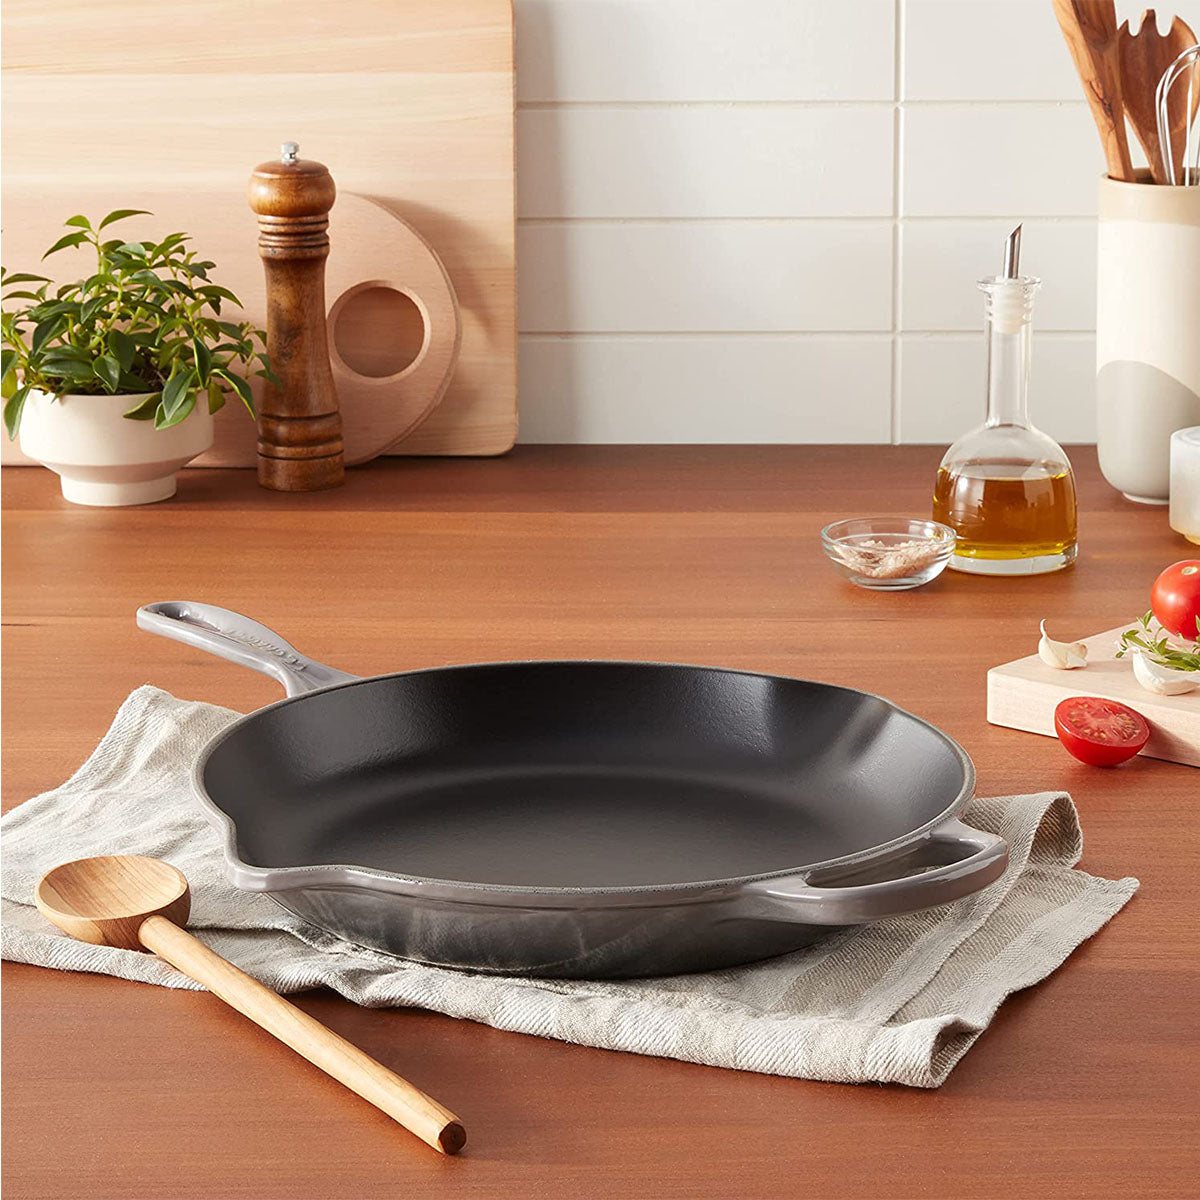 Le Creuset Signature 9'' Iron Handle Skillet - Oyster